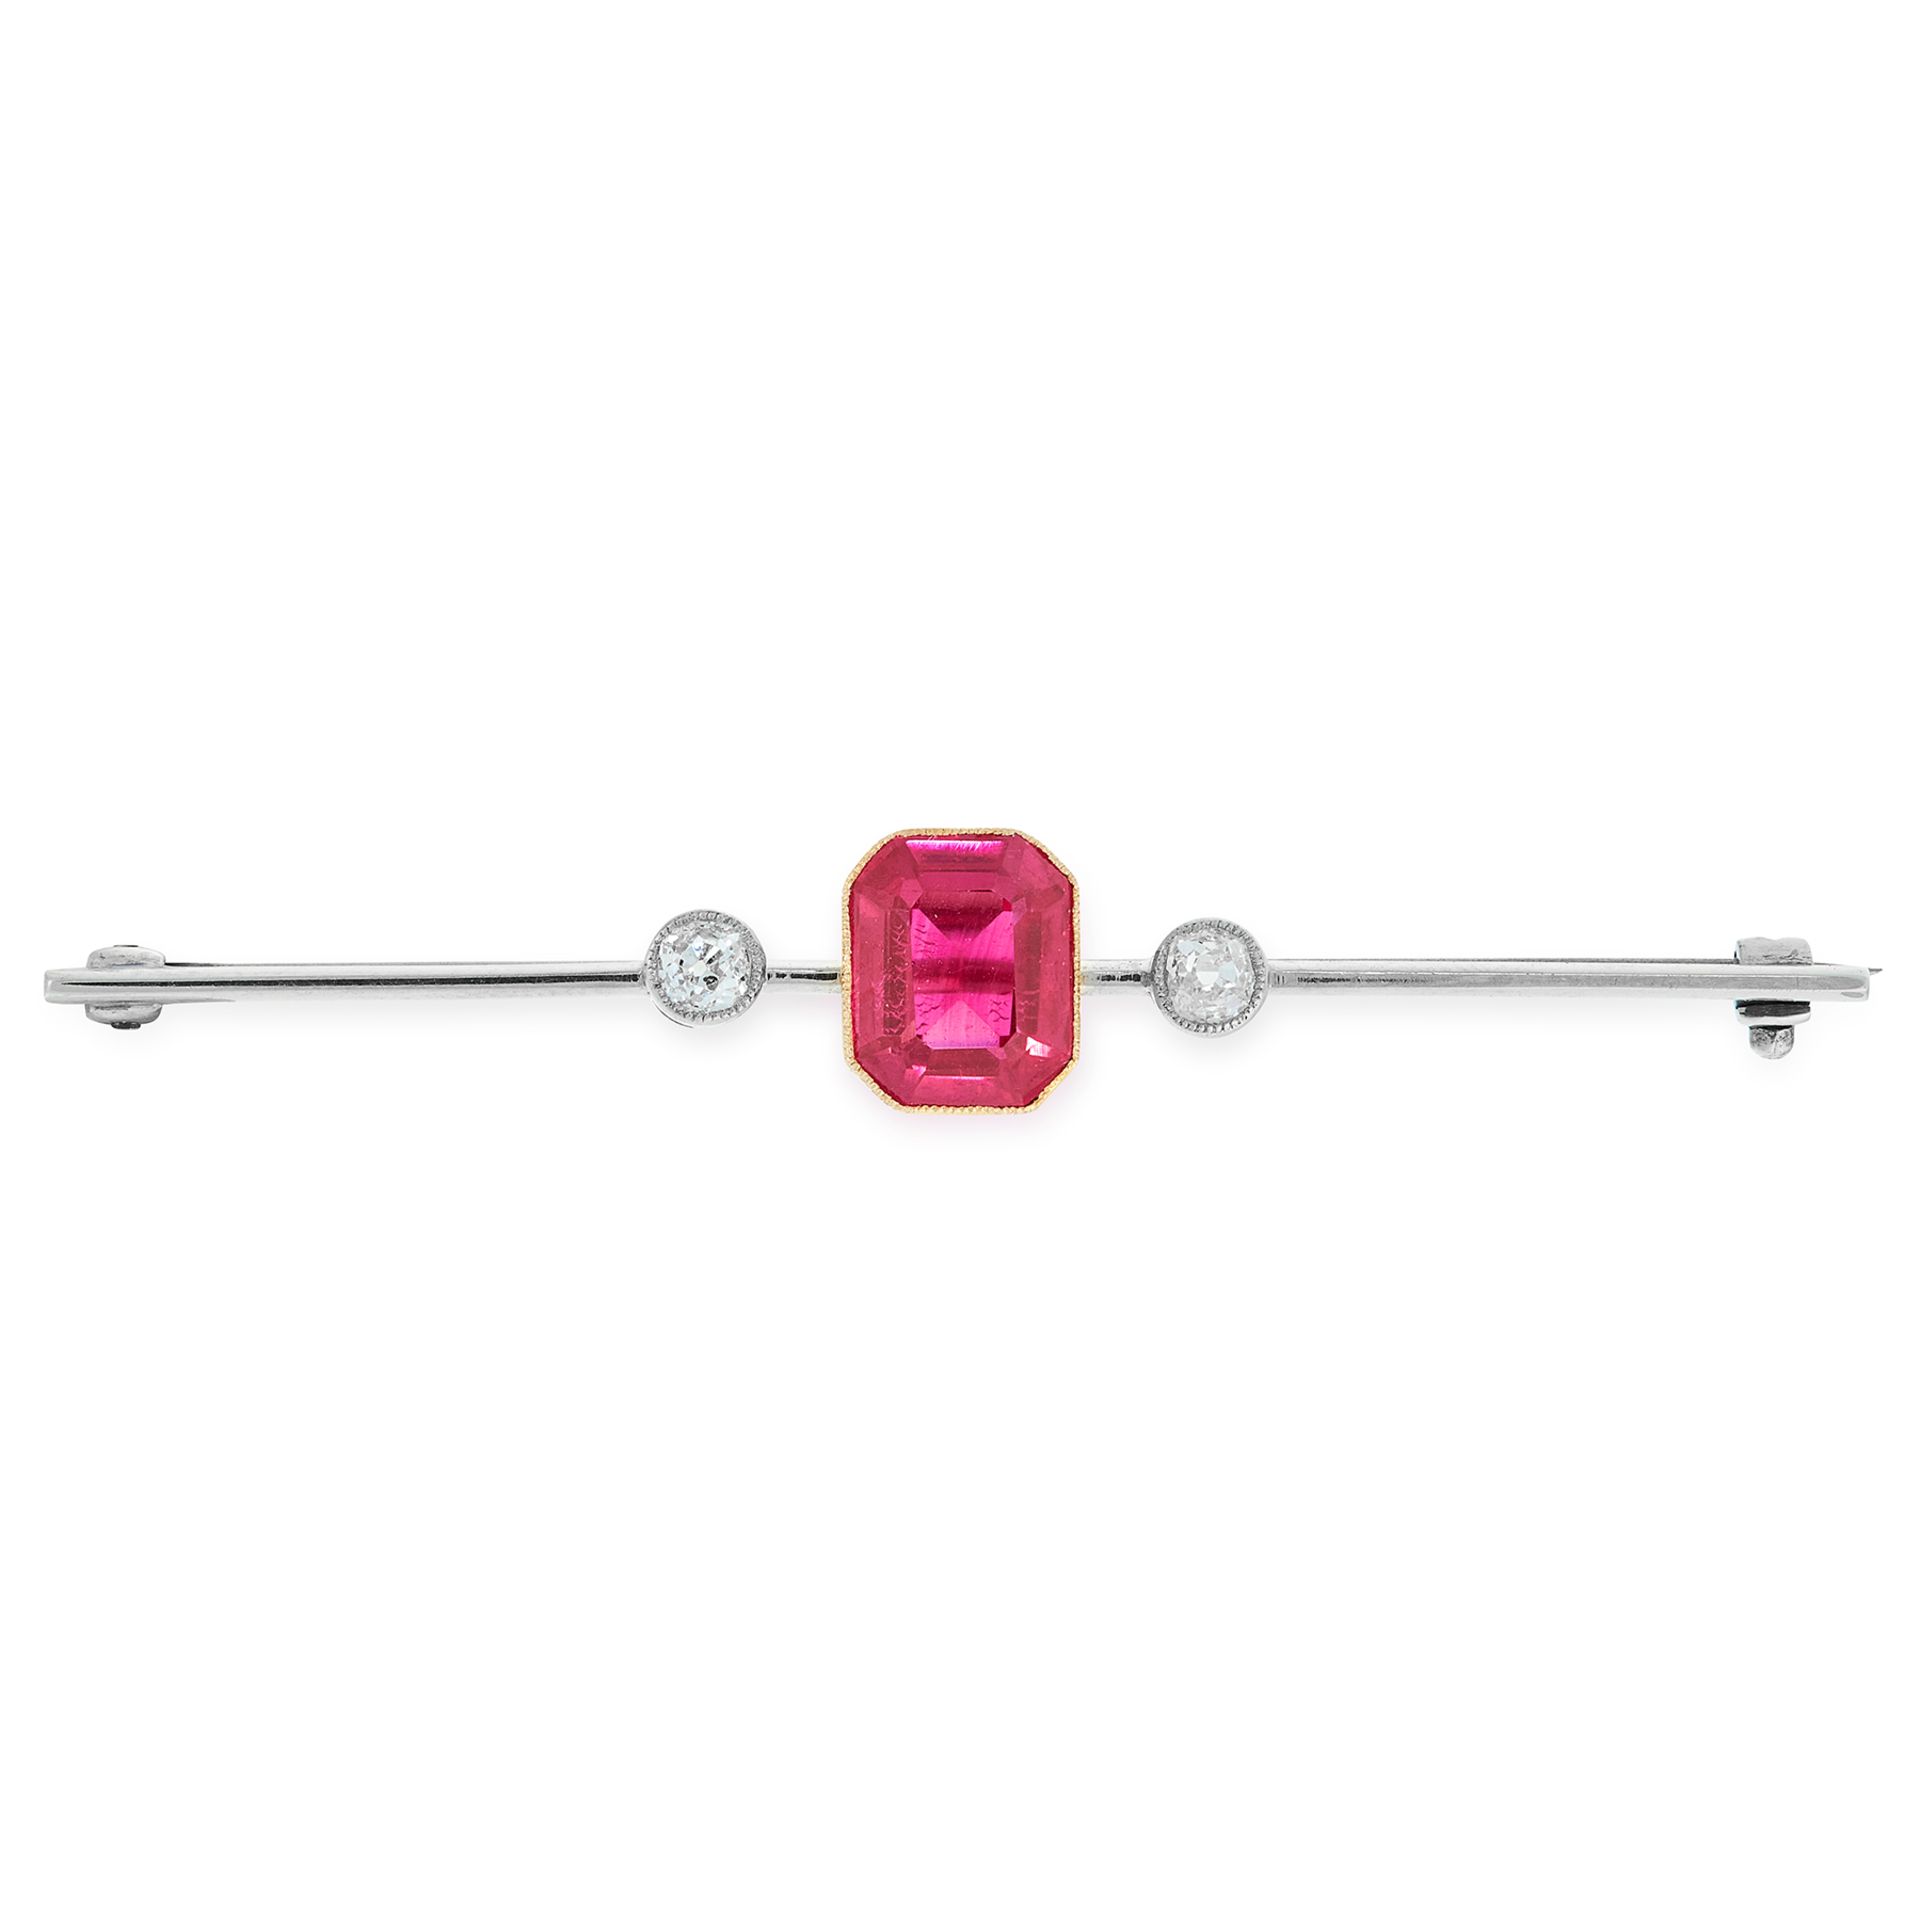 AN ANTIQUE PASTE AND DIAMOND BAR BROOCH set with a central emerald cut red gemstone between two